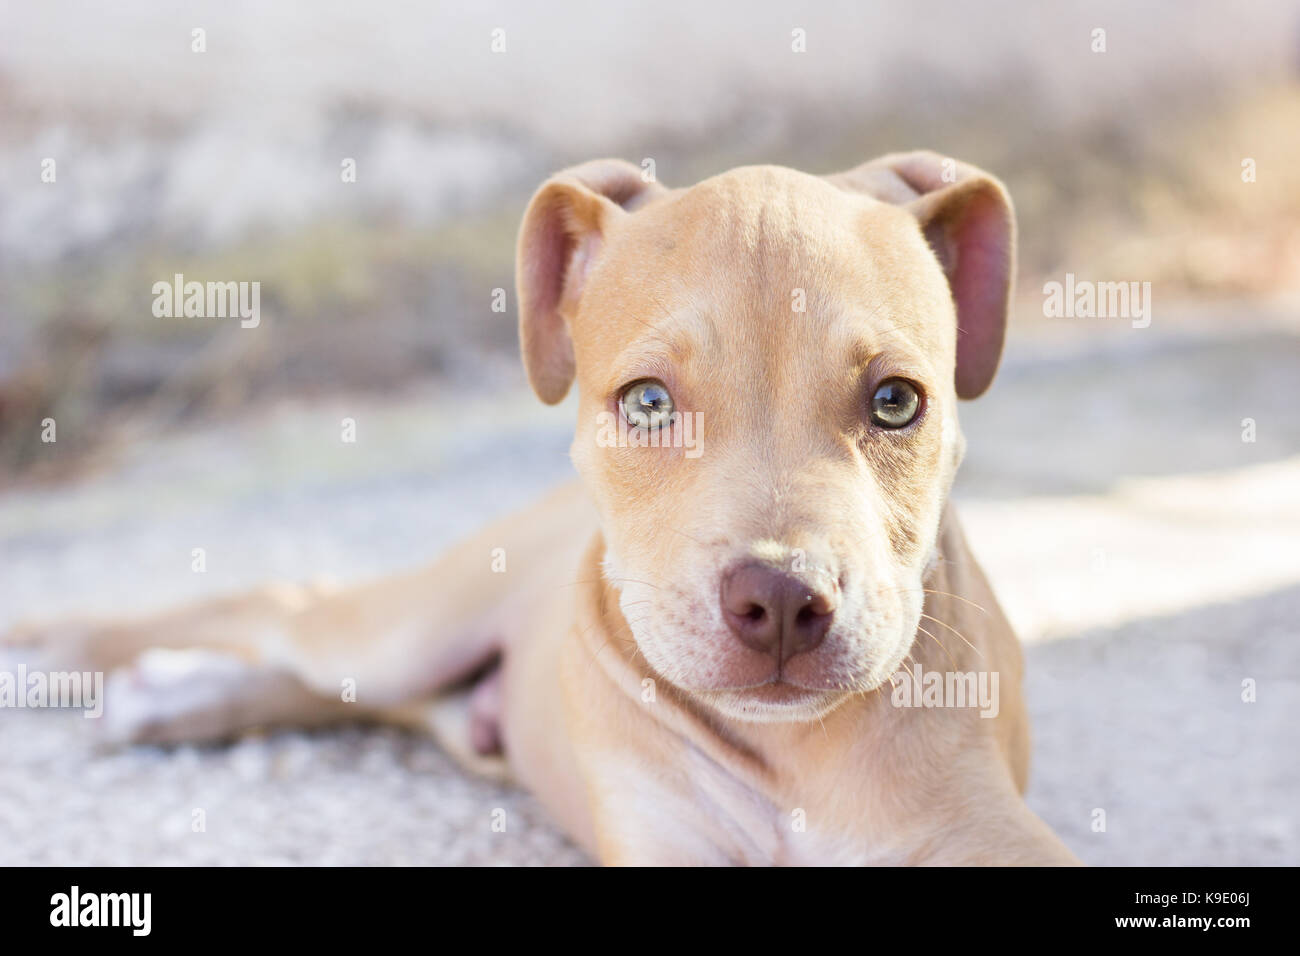 Pit-bull puppy outdoors Banque D'Images